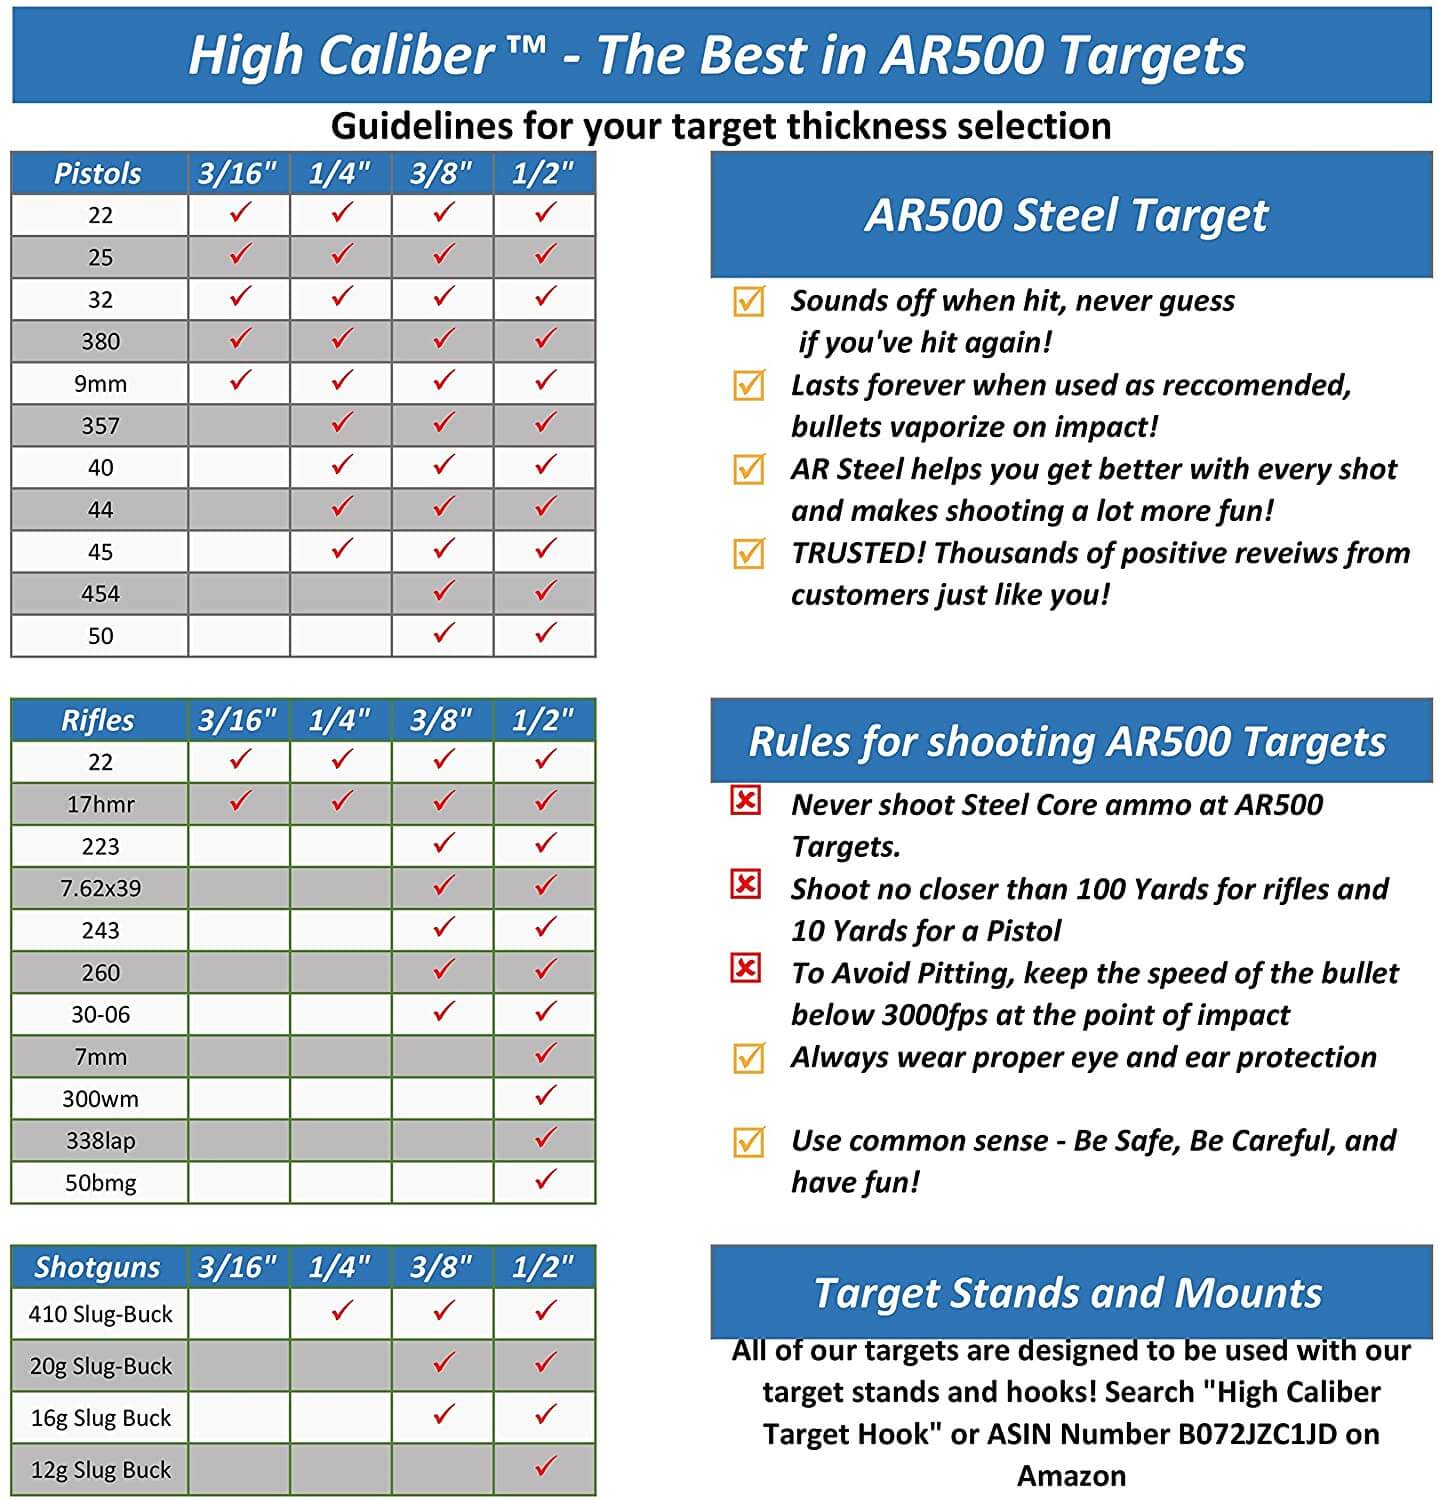 High Caliber AR500 3/8" Thick Silhouette Targets